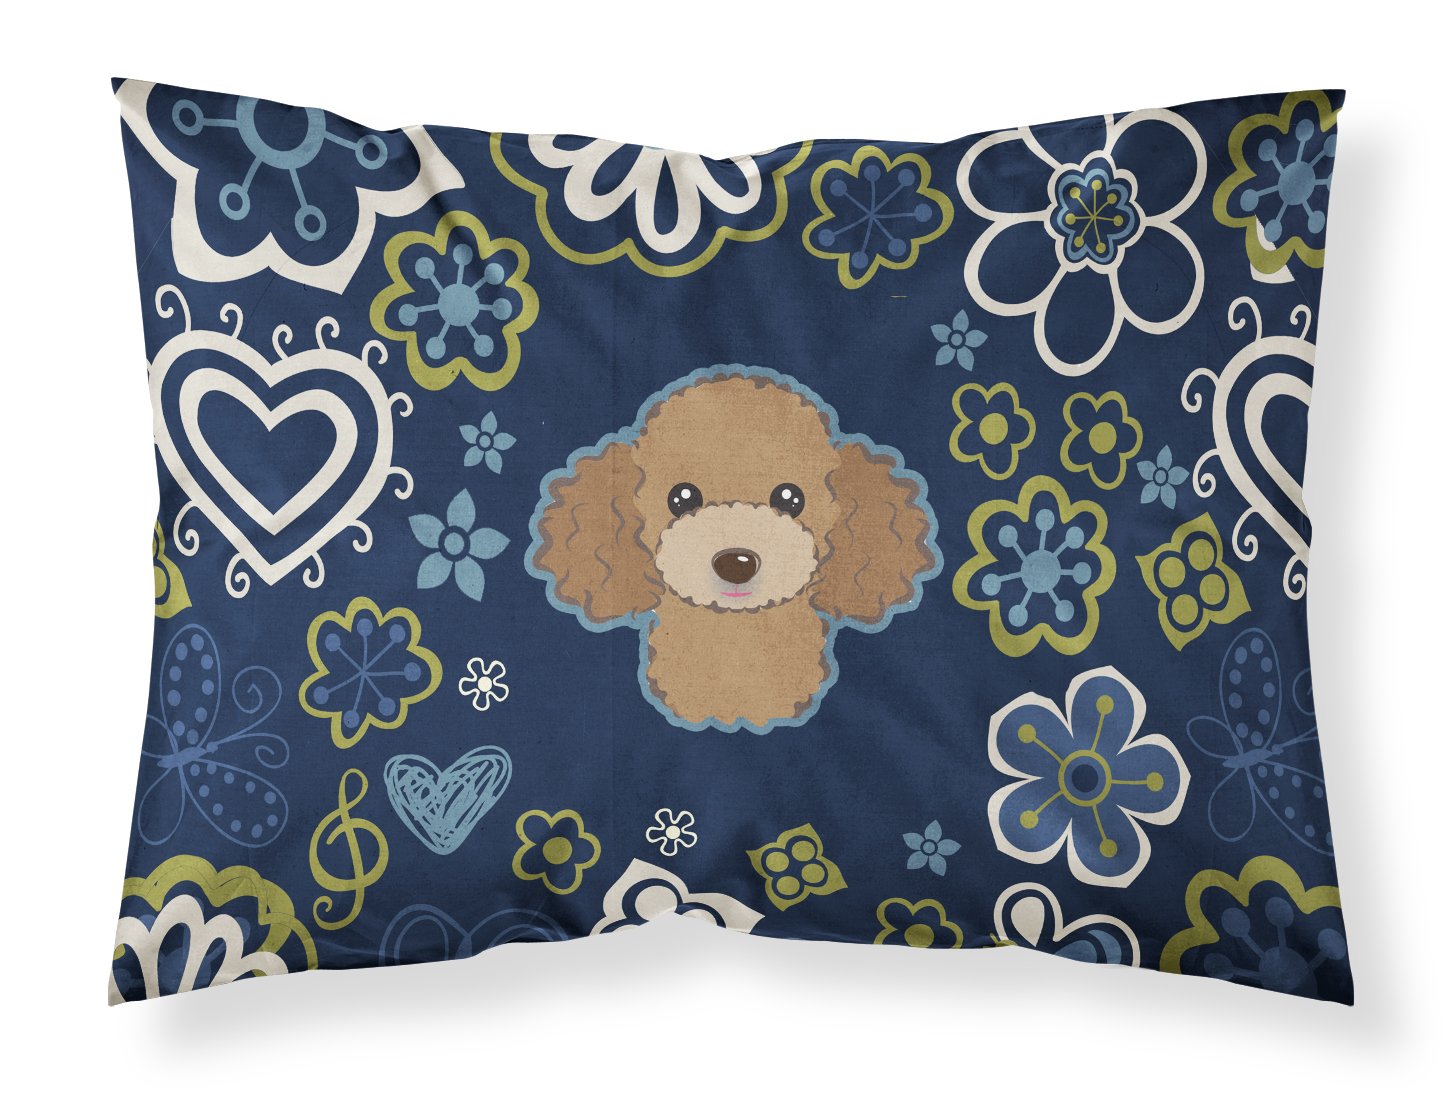 Blue Flowers Chocolate Brown Poodle Fabric Standard Pillowcase BB5107PILLOWCASE by Caroline's Treasures